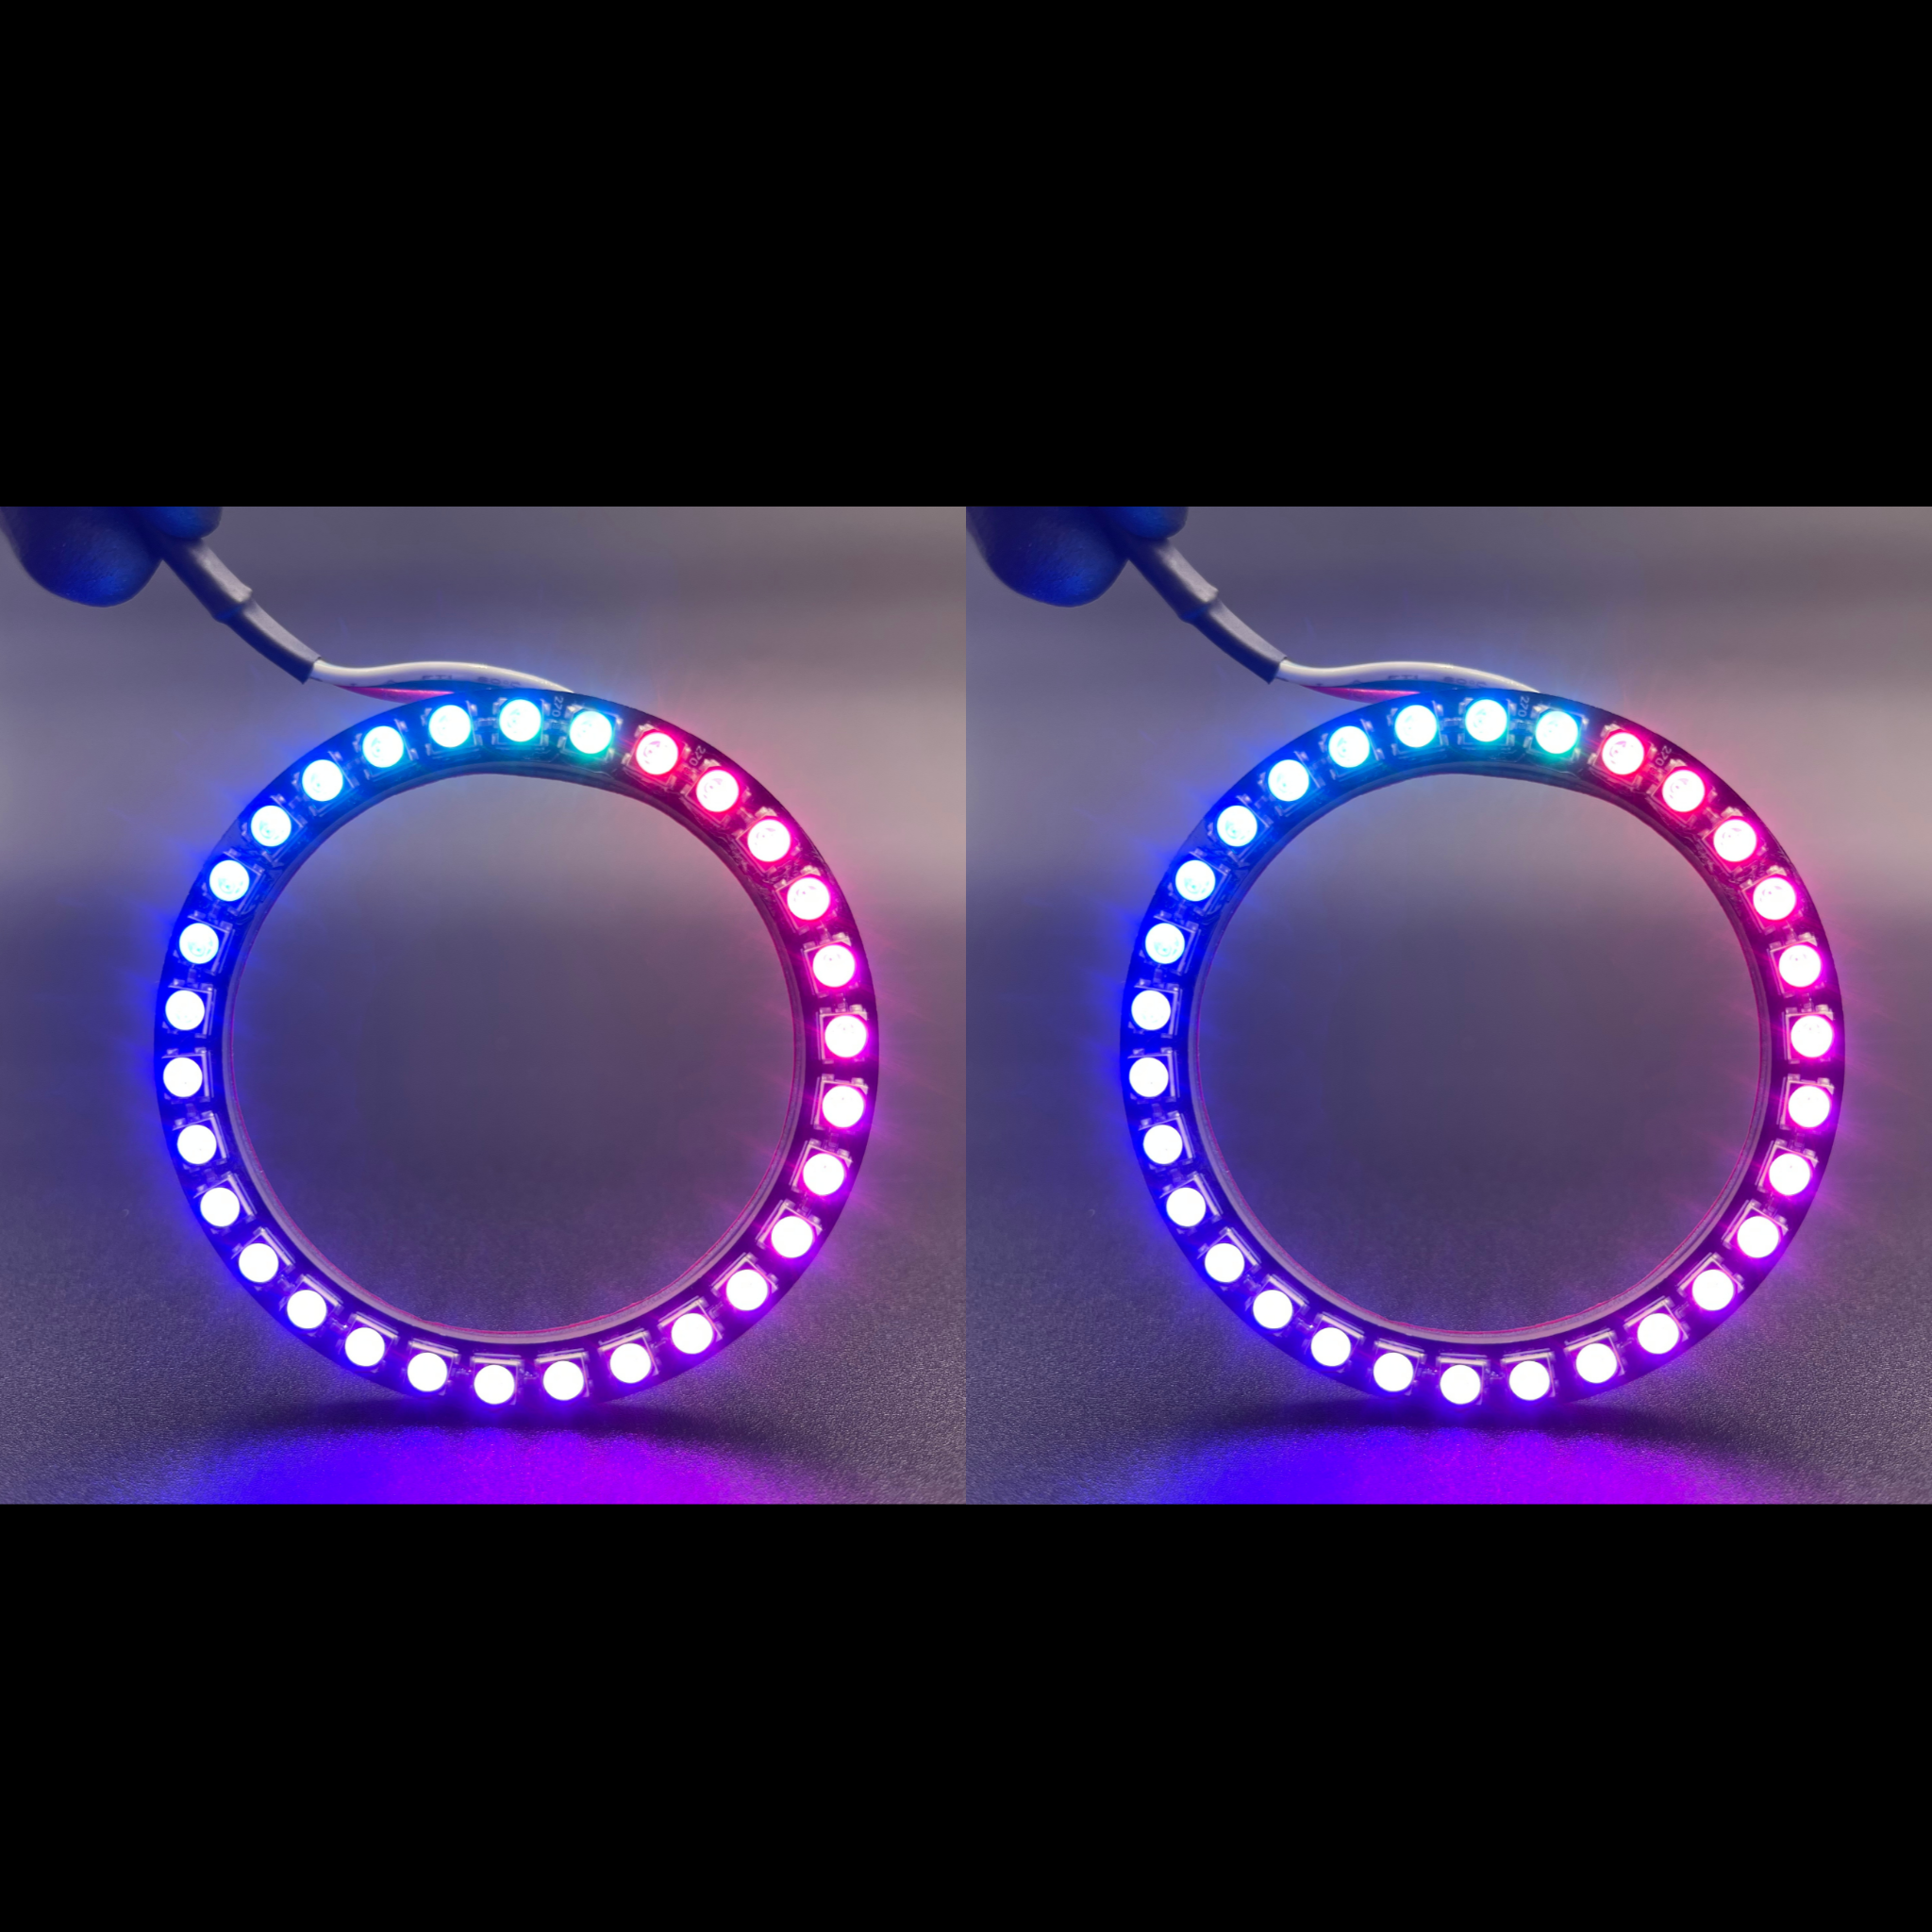 1999-2004 Ford Super Duty Multicolor Halo Kit - RGB Halo Kits Multicolor Flow Series Color Chasing RGBWA LED headlight kit Oracle Lighting Trendz OneUpLighting Morimoto theretrofitsource AutoLEDTech Diode Dynamics